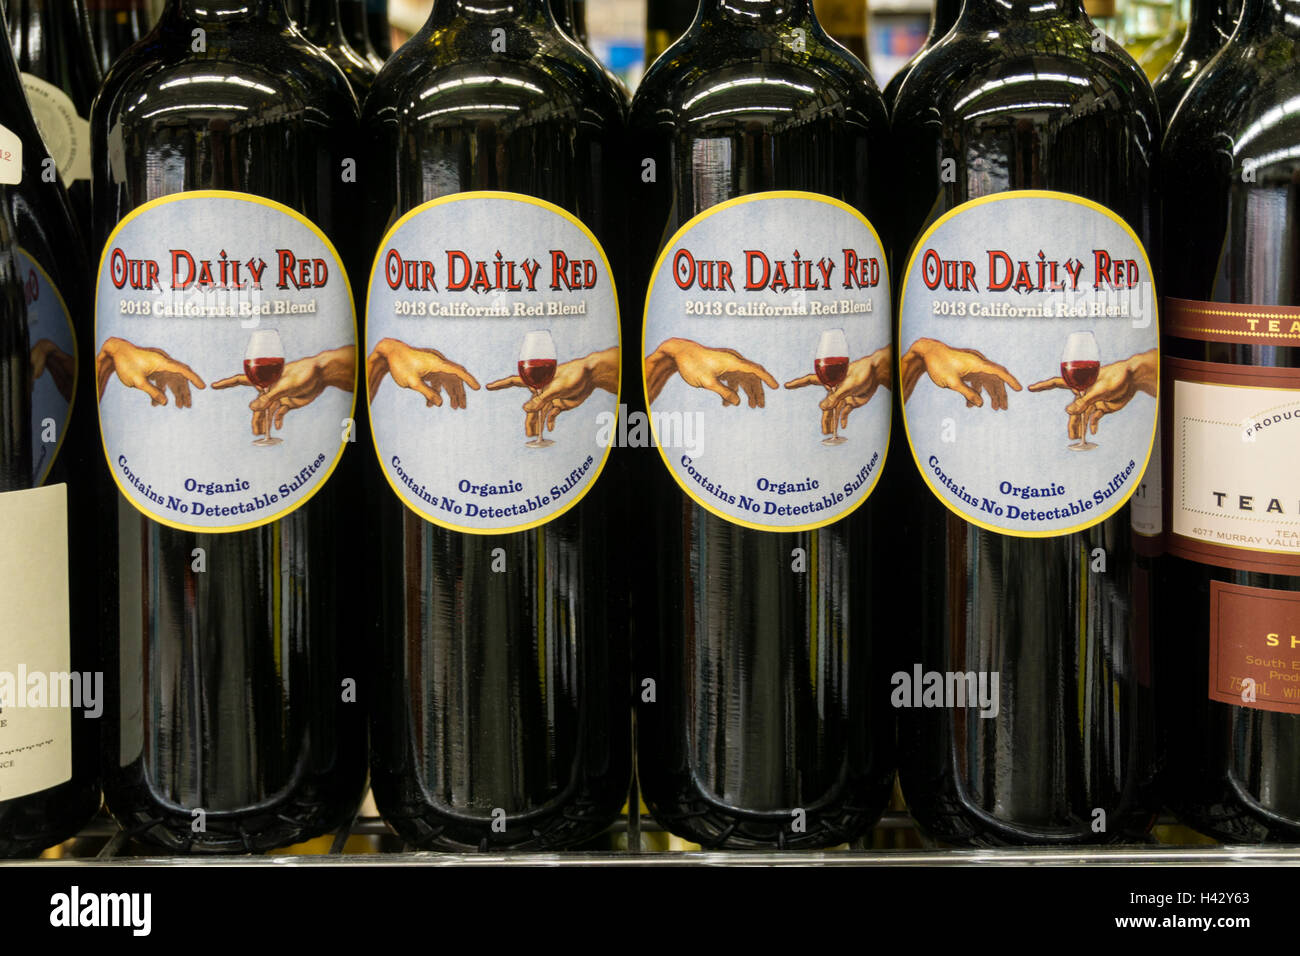 Bottles of Our Daily Red organic 2013 California Red Blend wine.  Label says Contains No Detectable Sulfites. Stock Photo